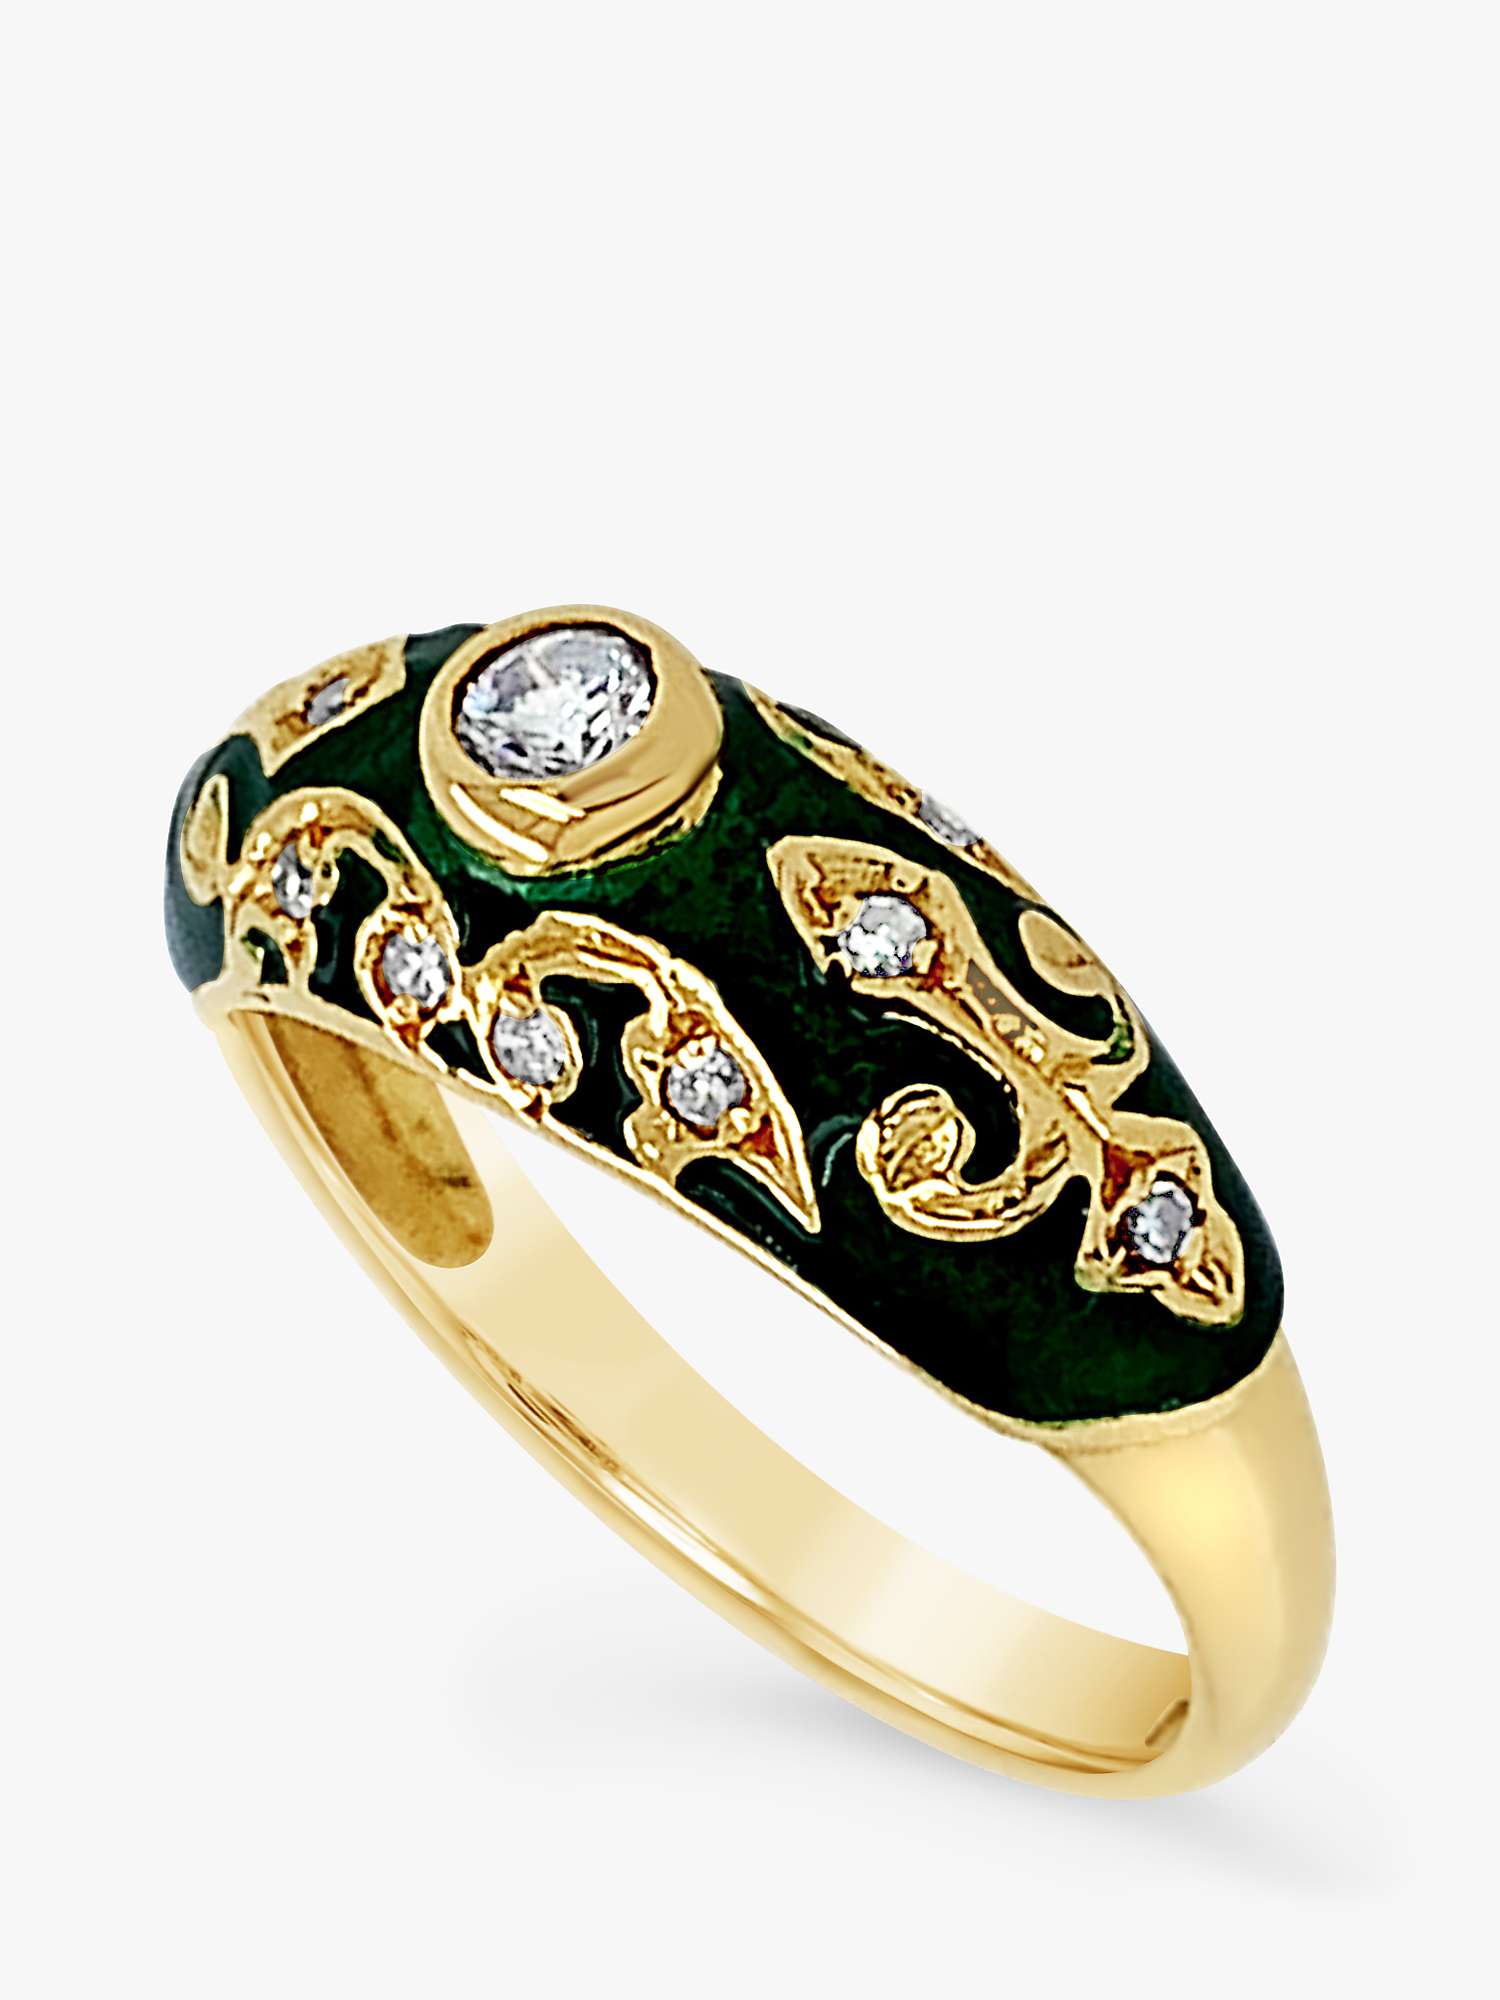 Buy Milton & Humble Jewellery 18ct Yellow Gold Second Hand Domed Enamel Diamond Ring Online at johnlewis.com